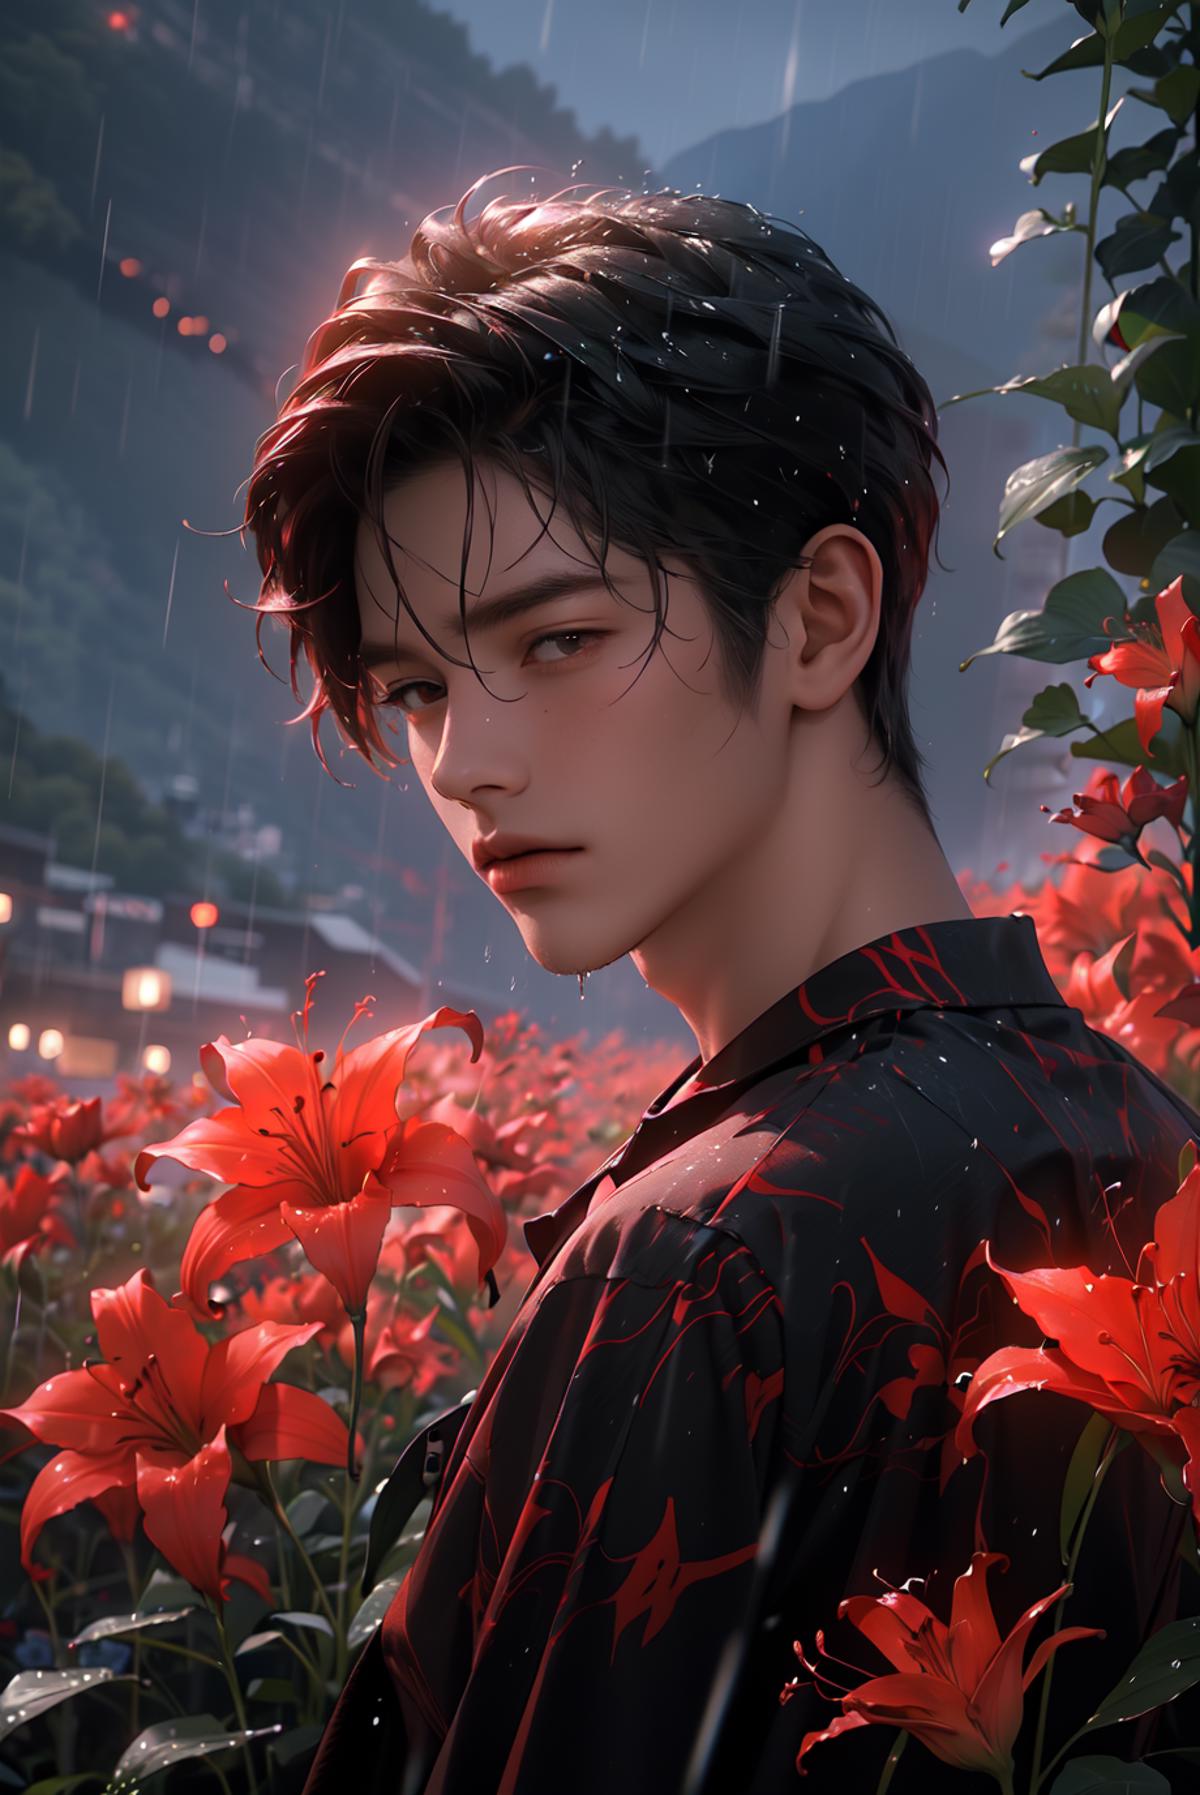 Artistic Drawing of a Young Man Standing in Flowers with Rainy Background